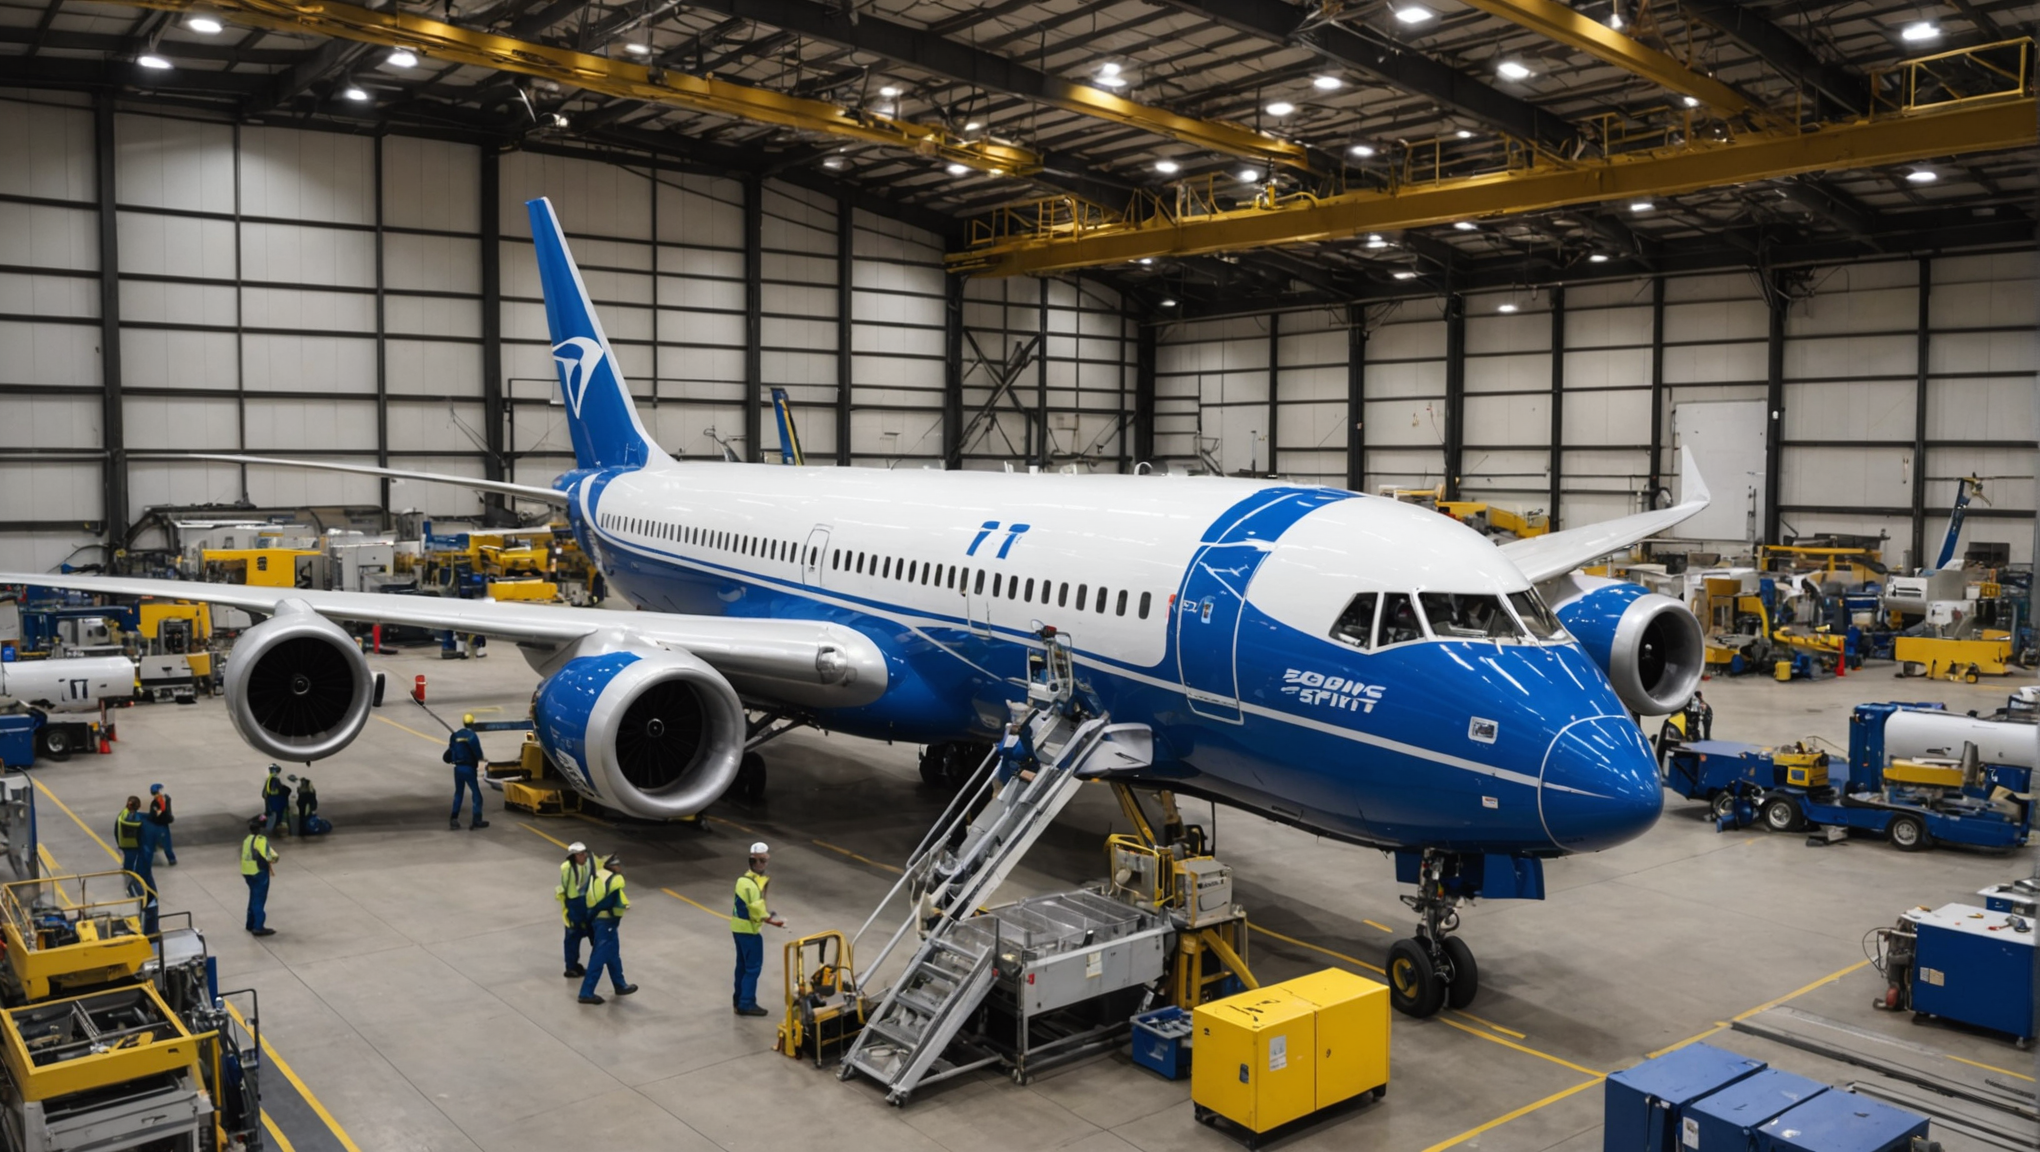 boeing acquires spirit aerosystems for $8.3 billion, a major acquisition in the aerospace industry